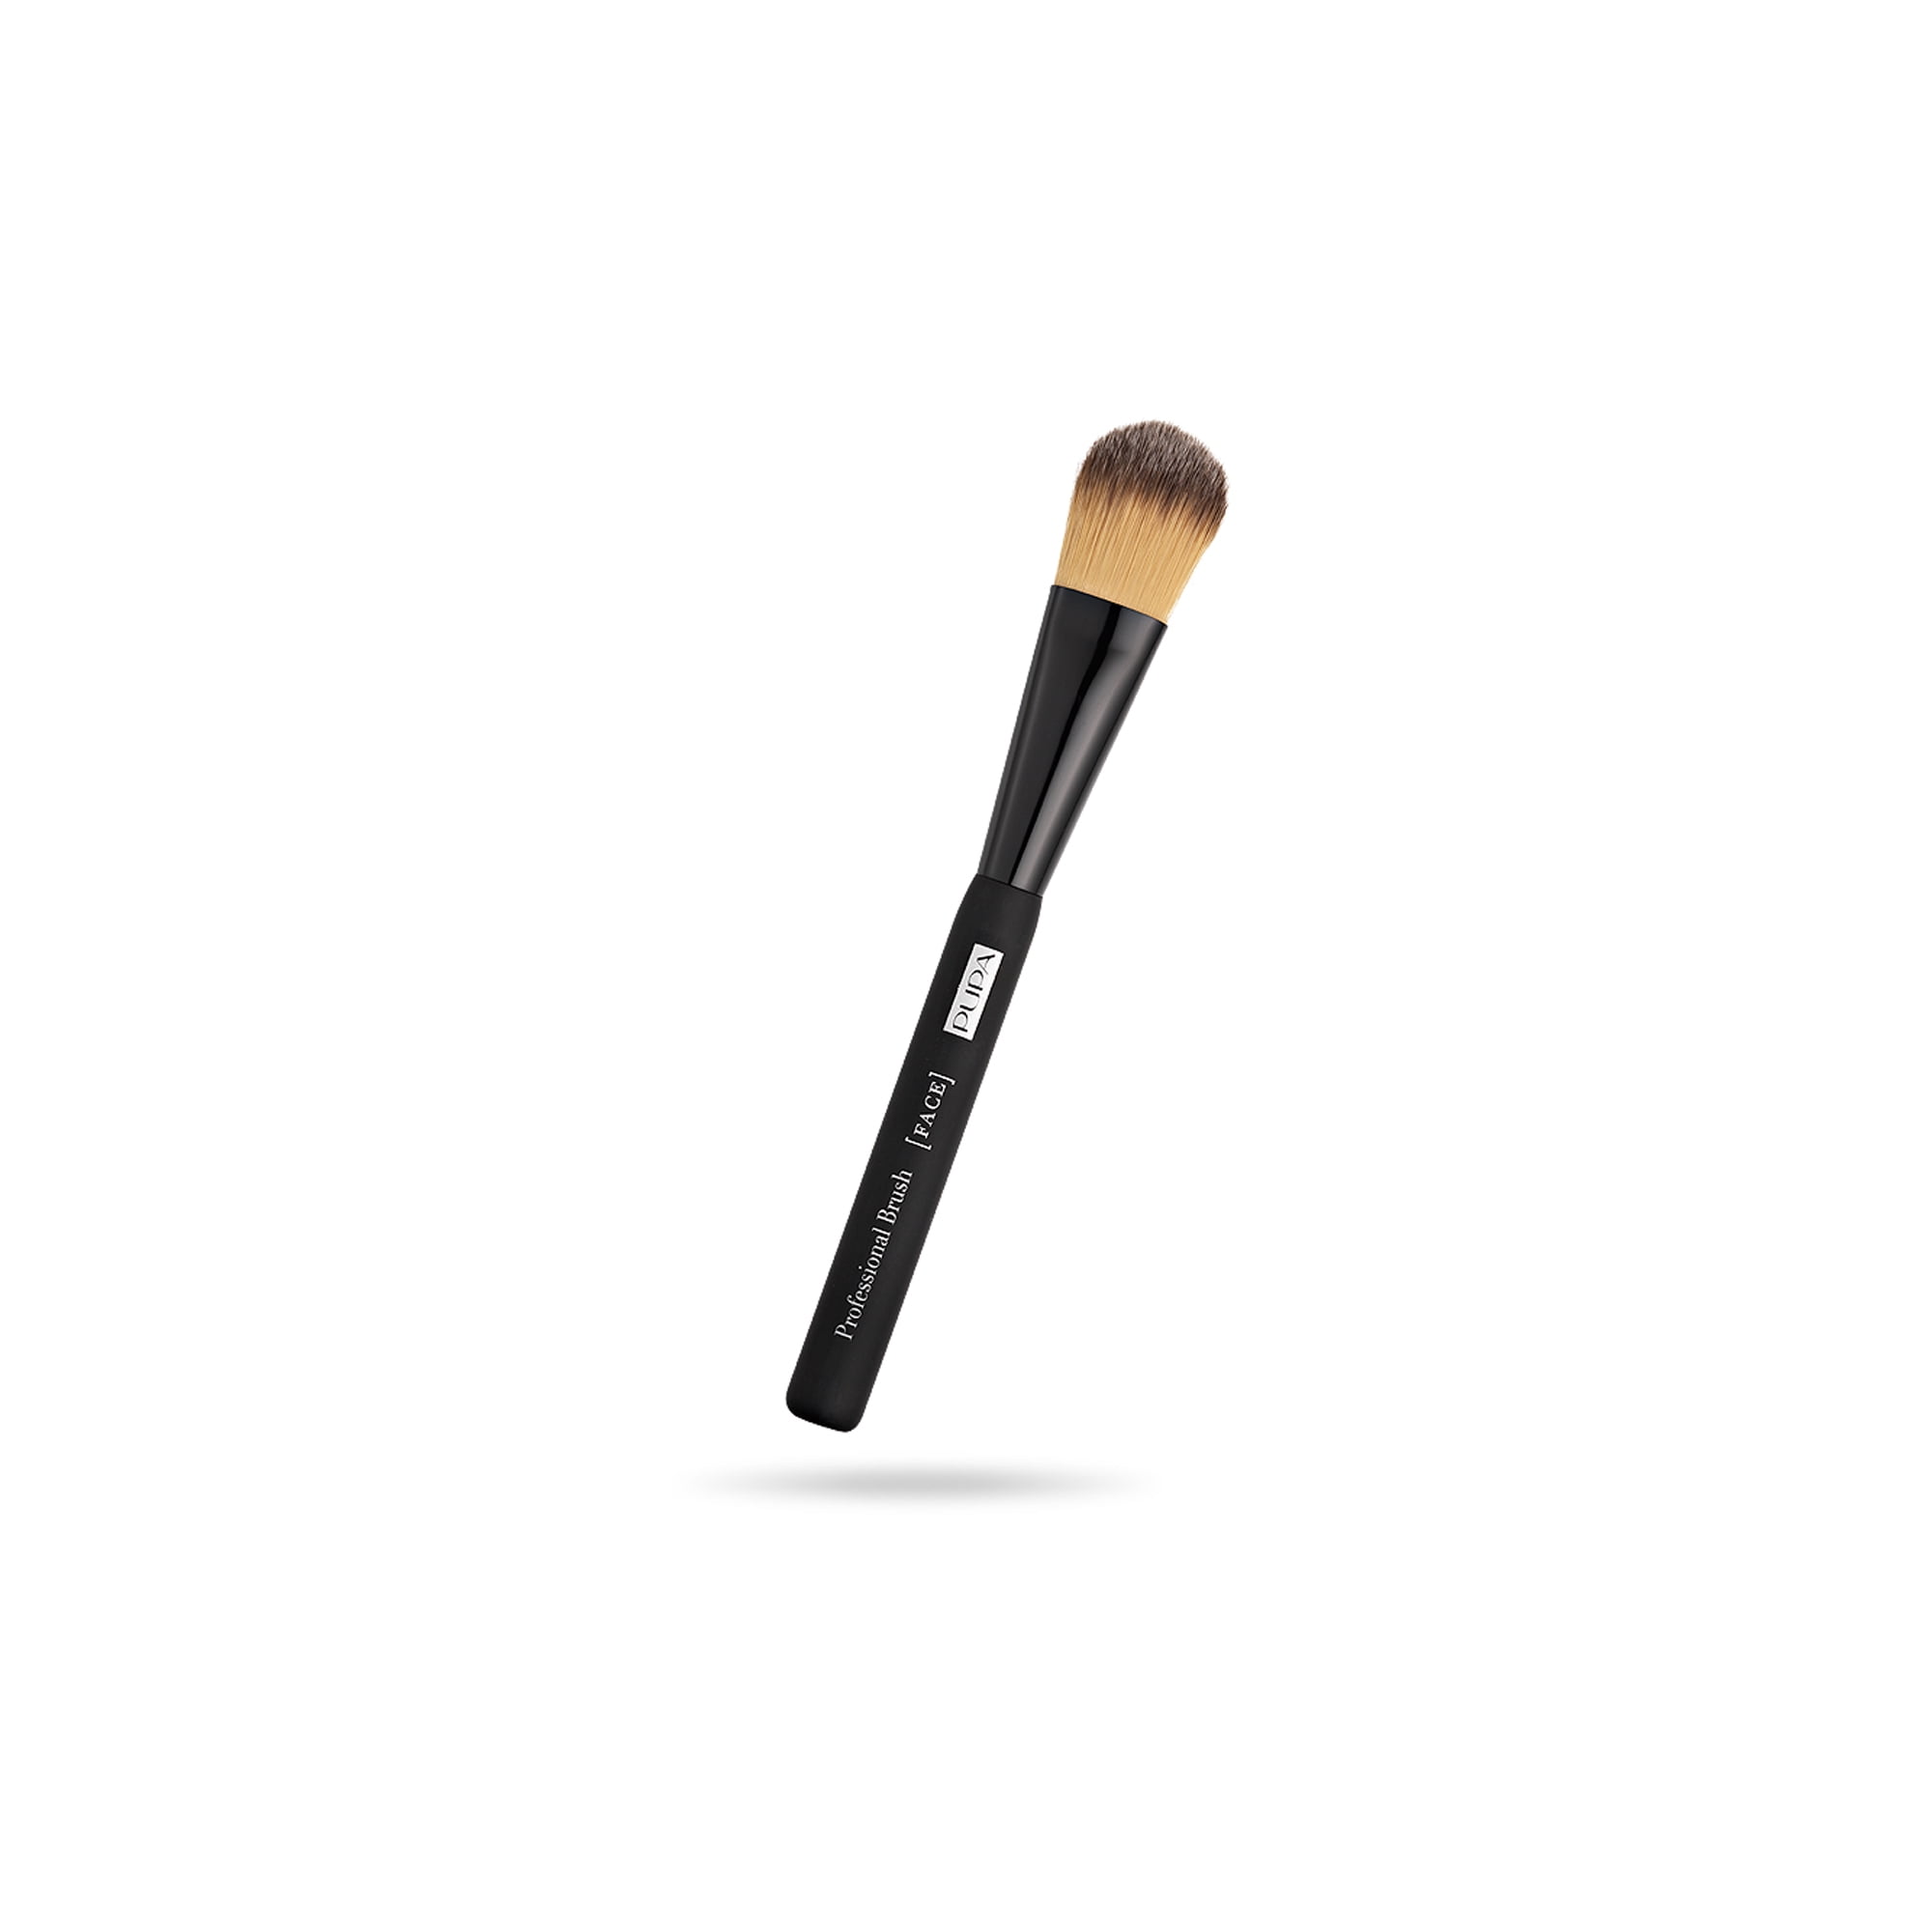 PUPA Milano Foundation Brush, Professional Makeup Brushes with Bag, 1 pc -  